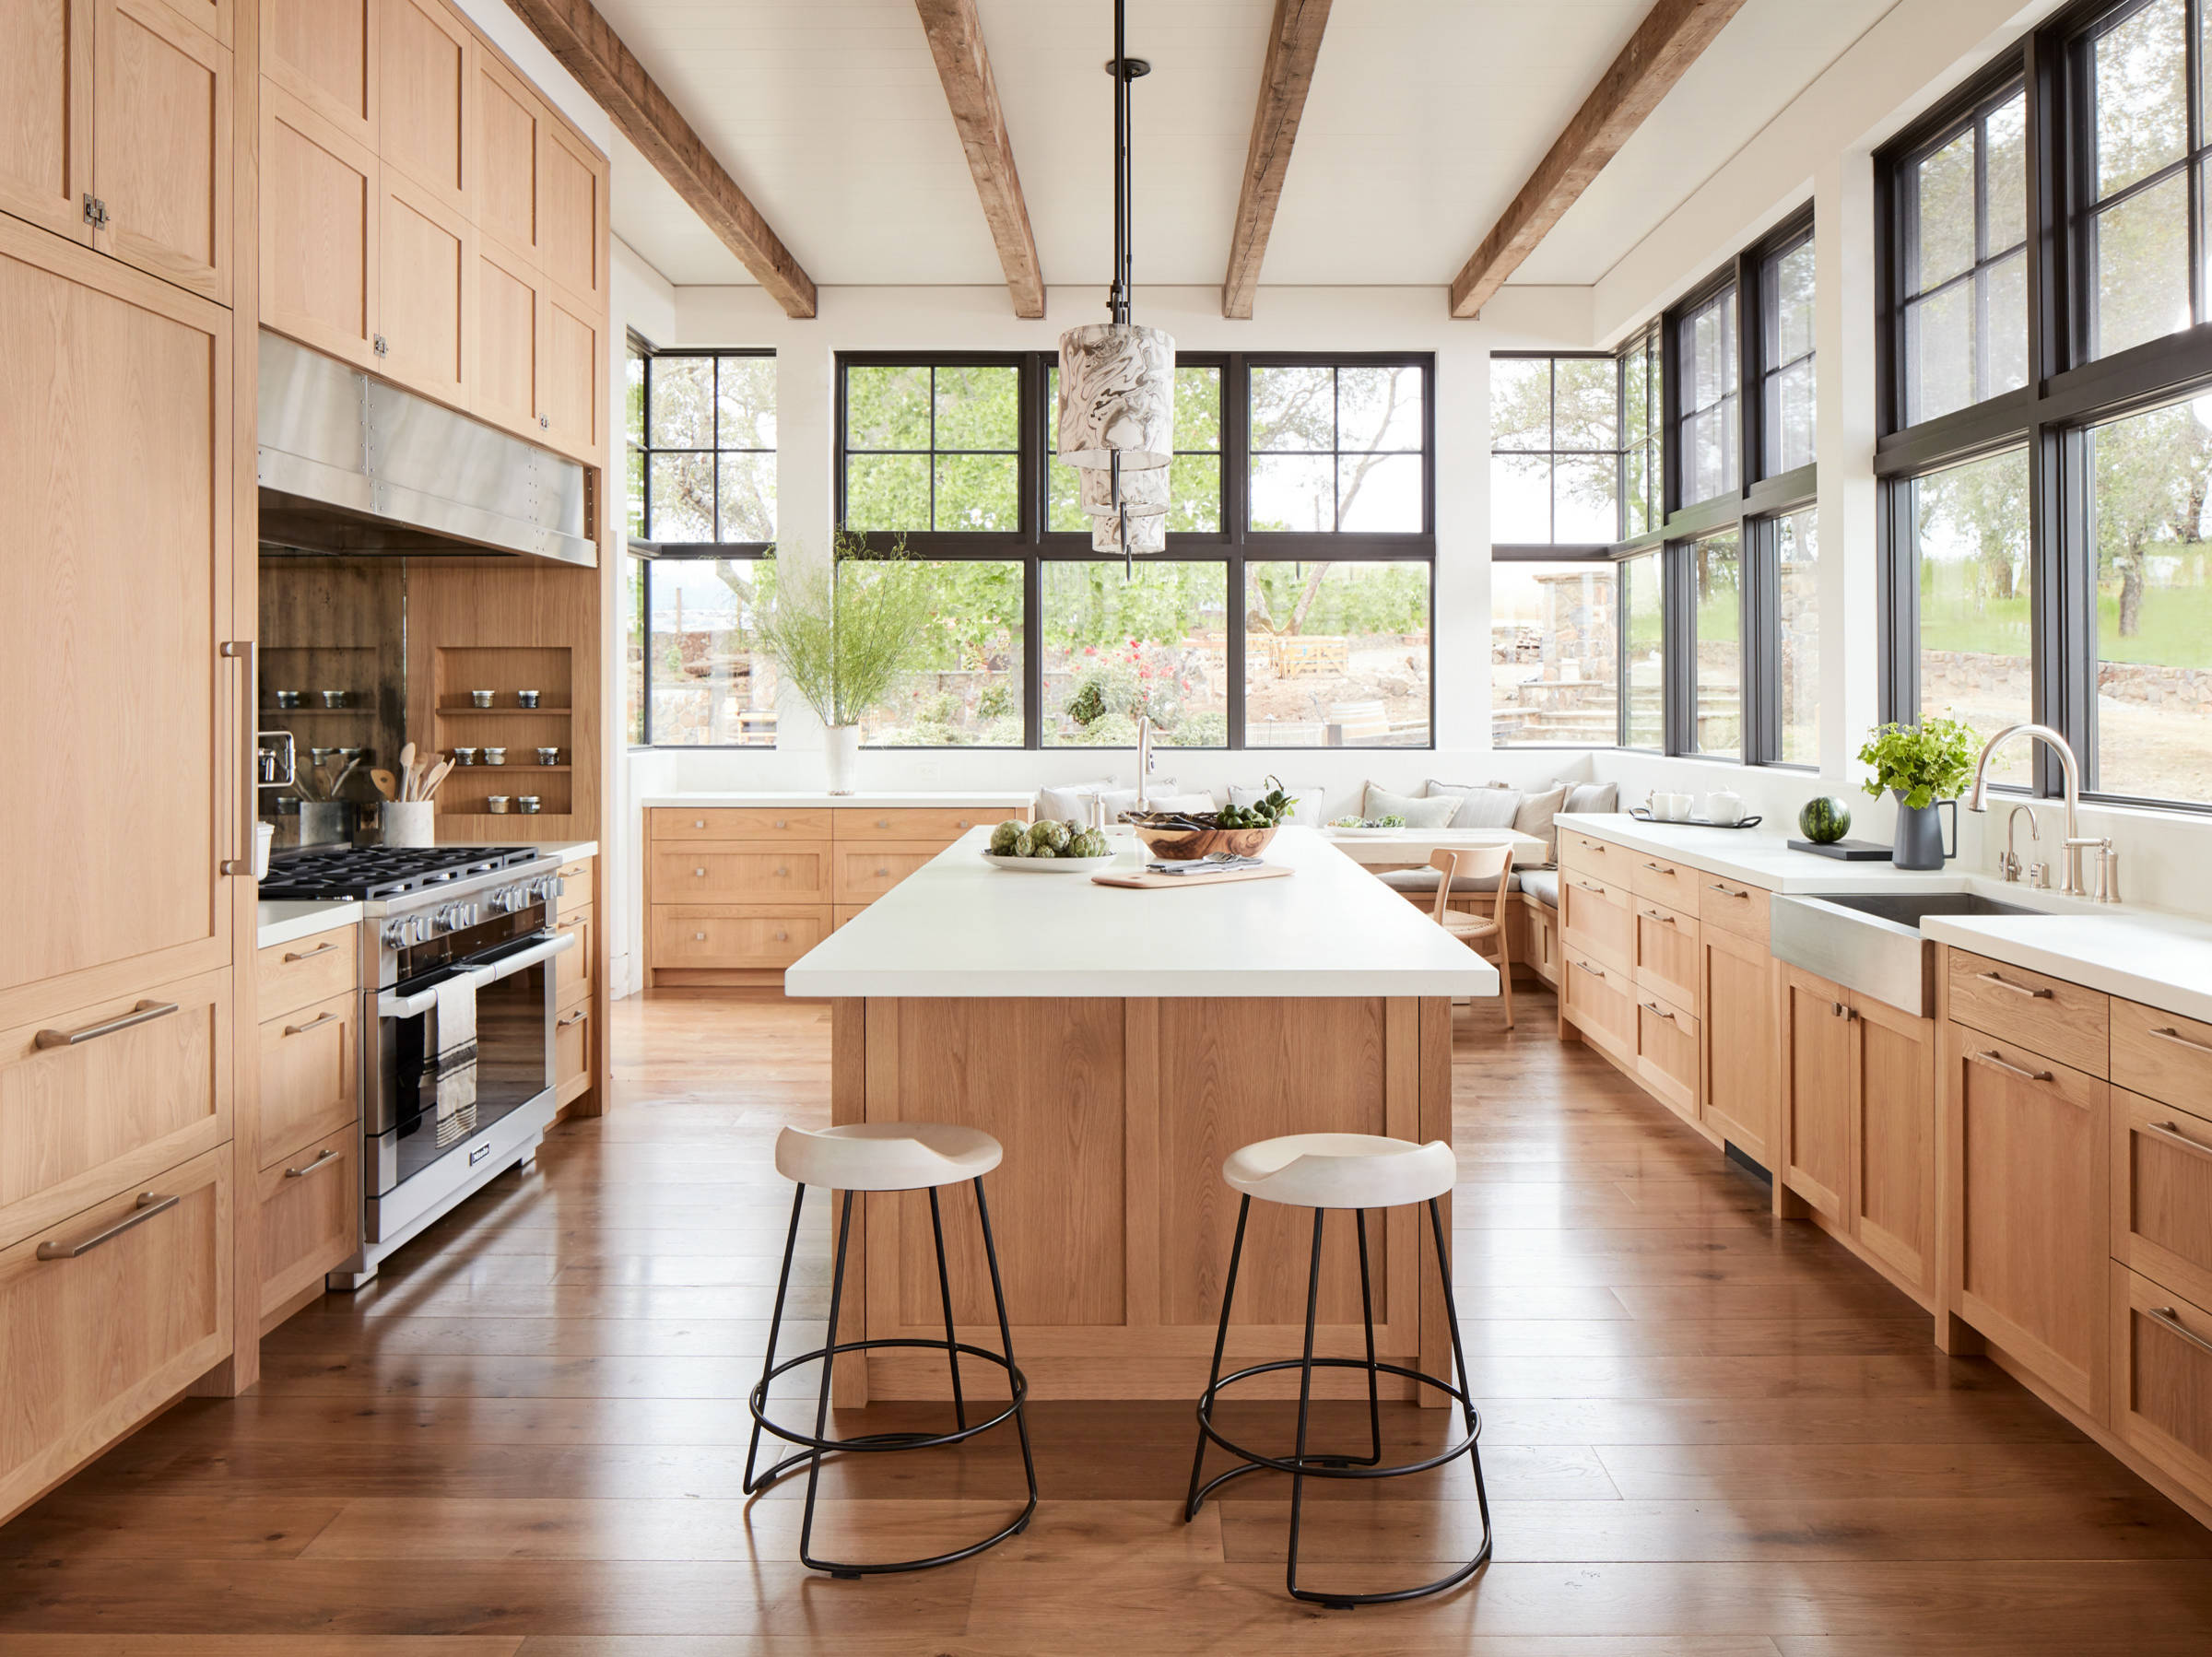 Modern Farmhouse Kitchen Design Combining Rustic and Contemporary Elements